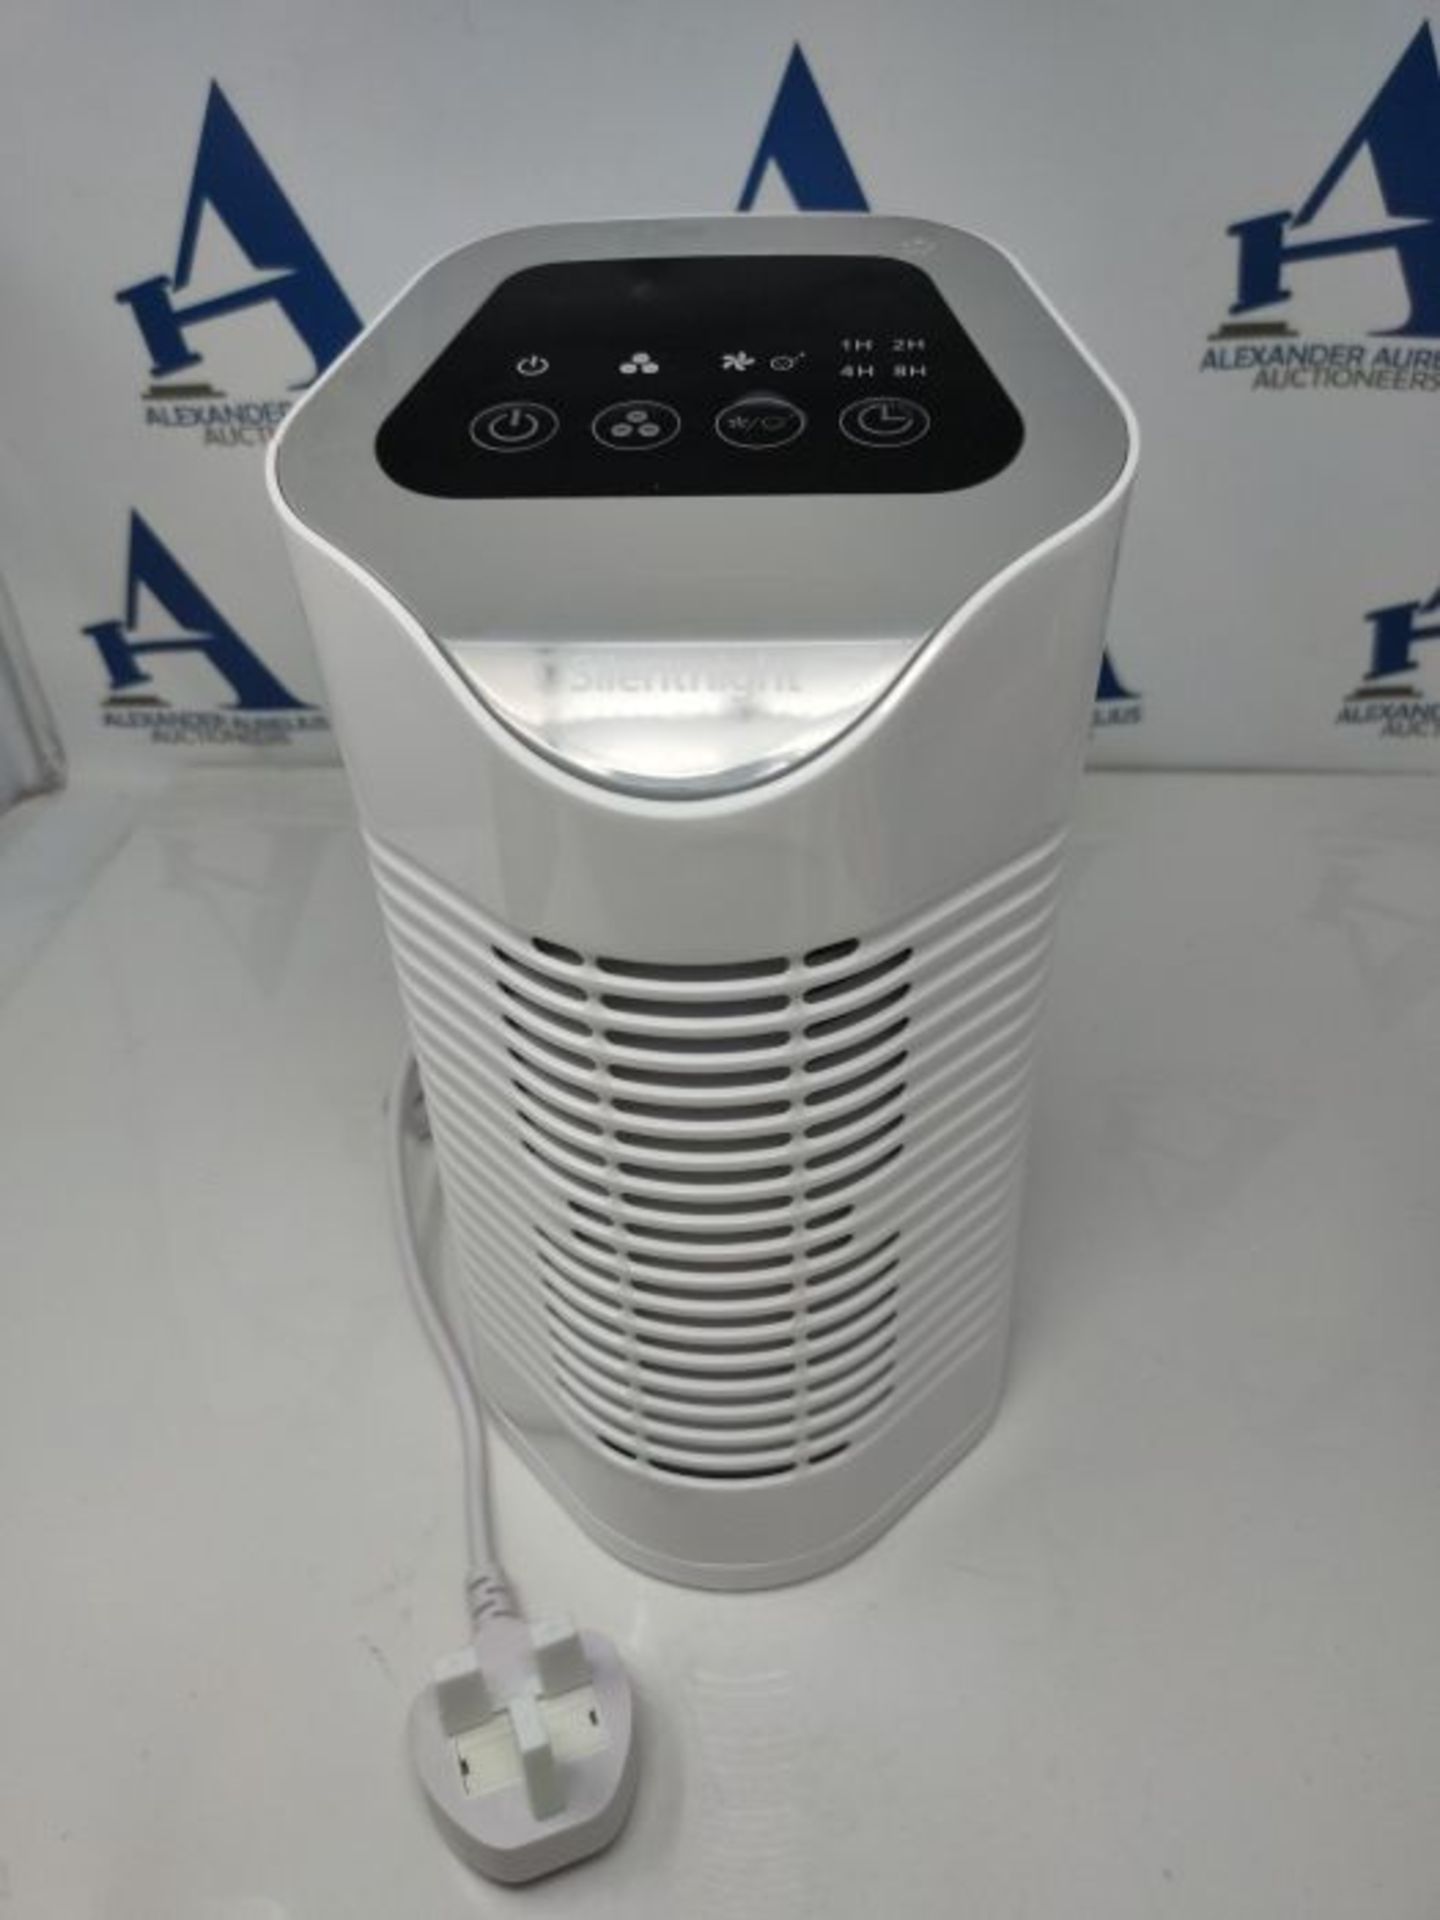 Silentnight Air Purifier with HEPA & Carbon Filters, Air Cleaner for Allergies, Pollen - Image 2 of 2